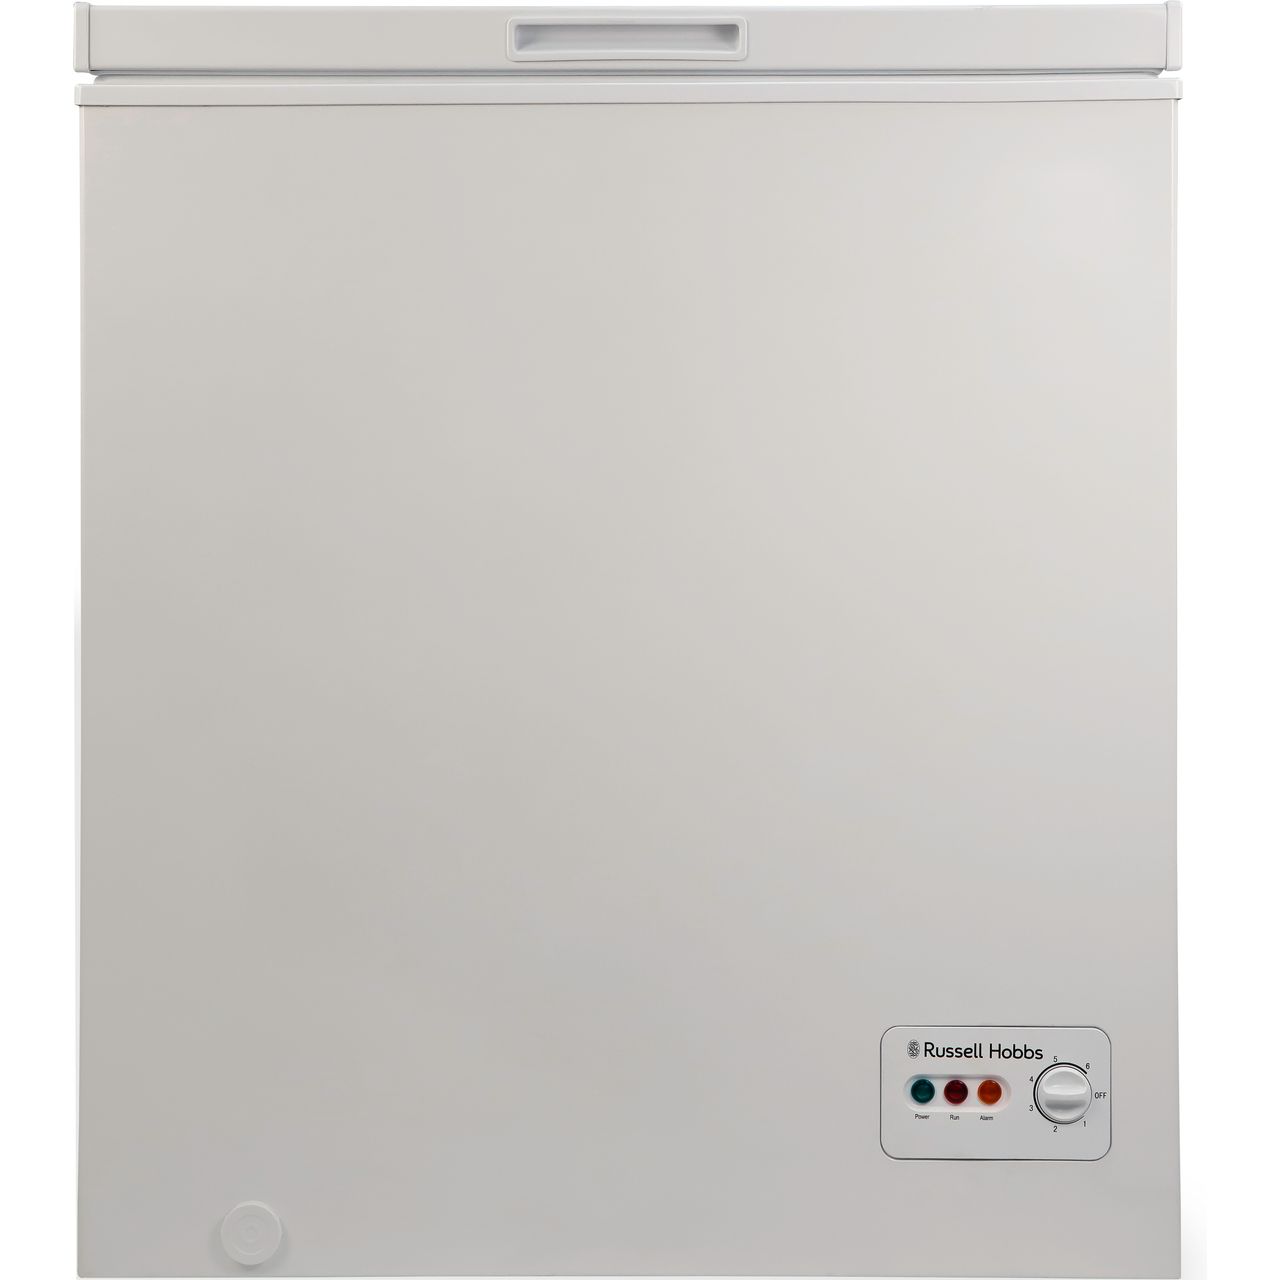 Russell Hobbs RHCF150-MD Chest Freezer Review